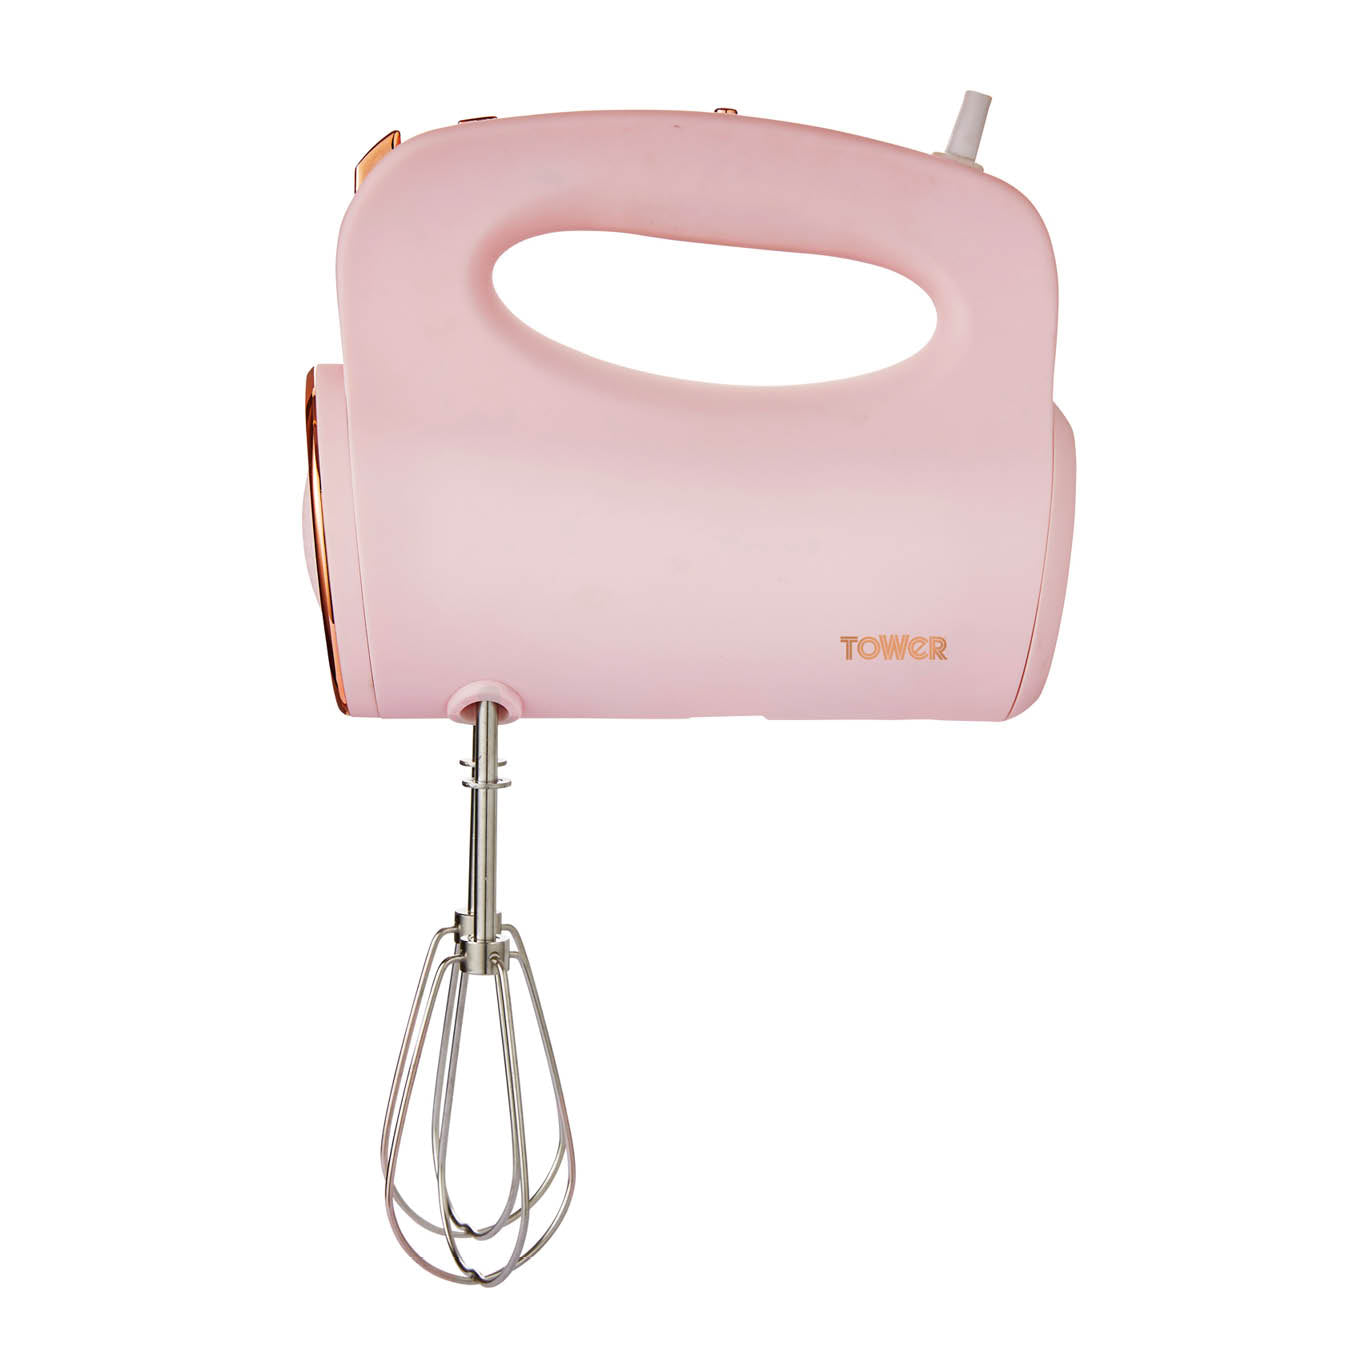 Tower Cavaletto 300W Hand Mixer - Pink  | TJ Hughes